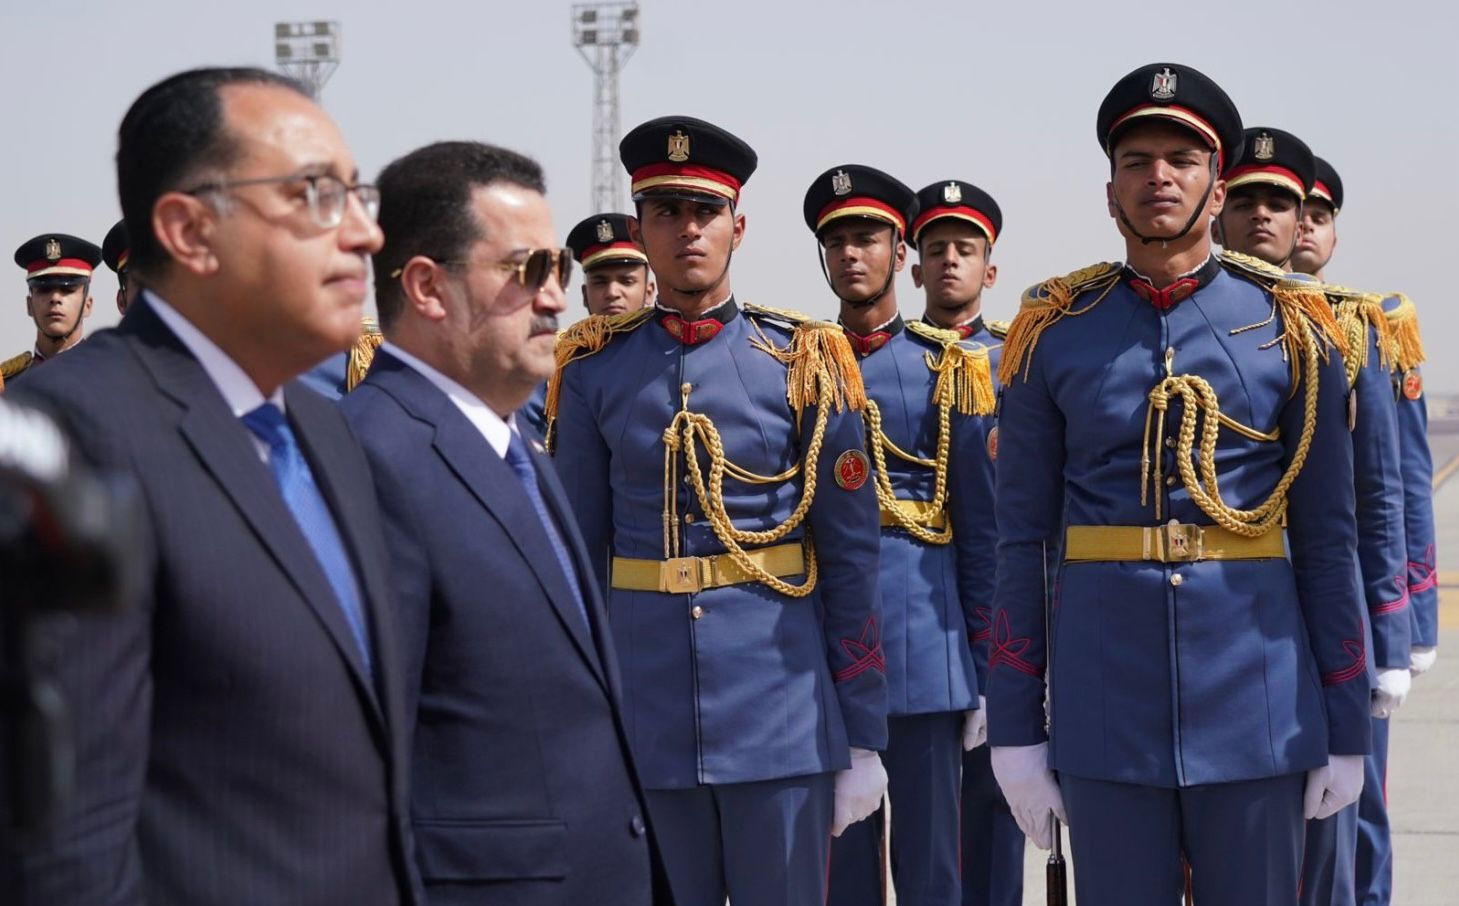 Iraq's PM wraps up a brief visit to Cairo